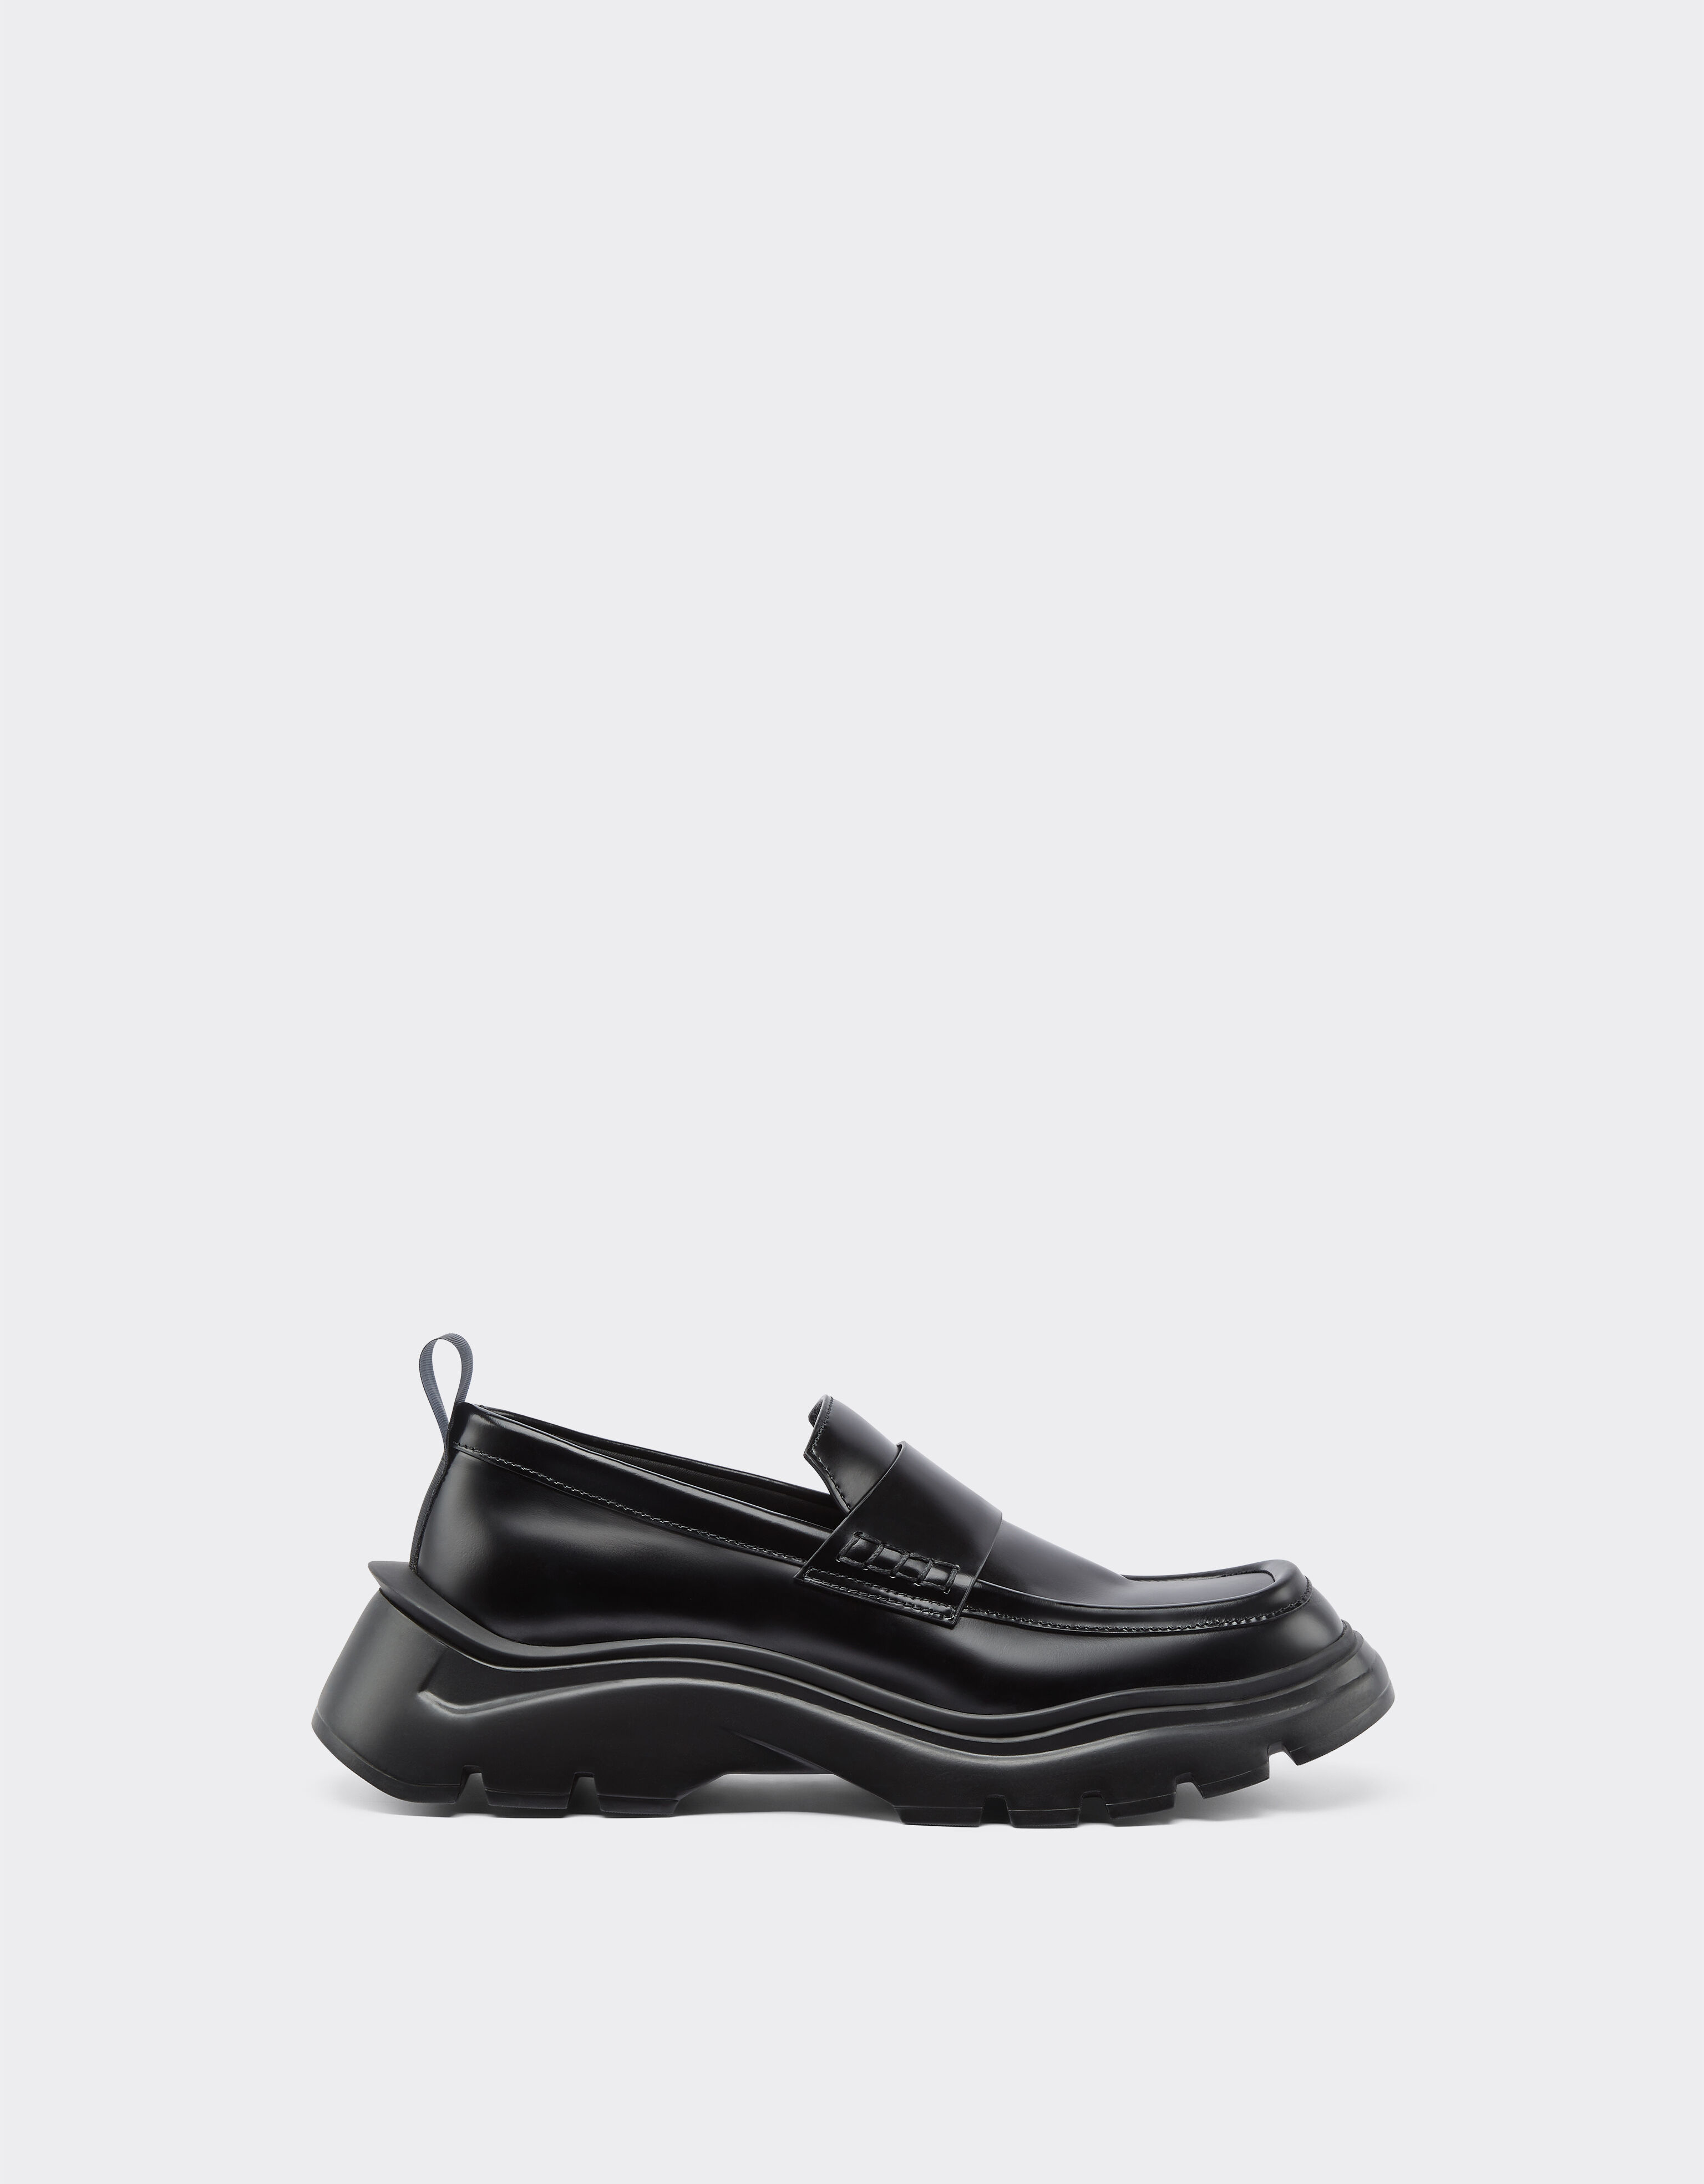 Ferrari Loafers in brushed leather Black 20513f